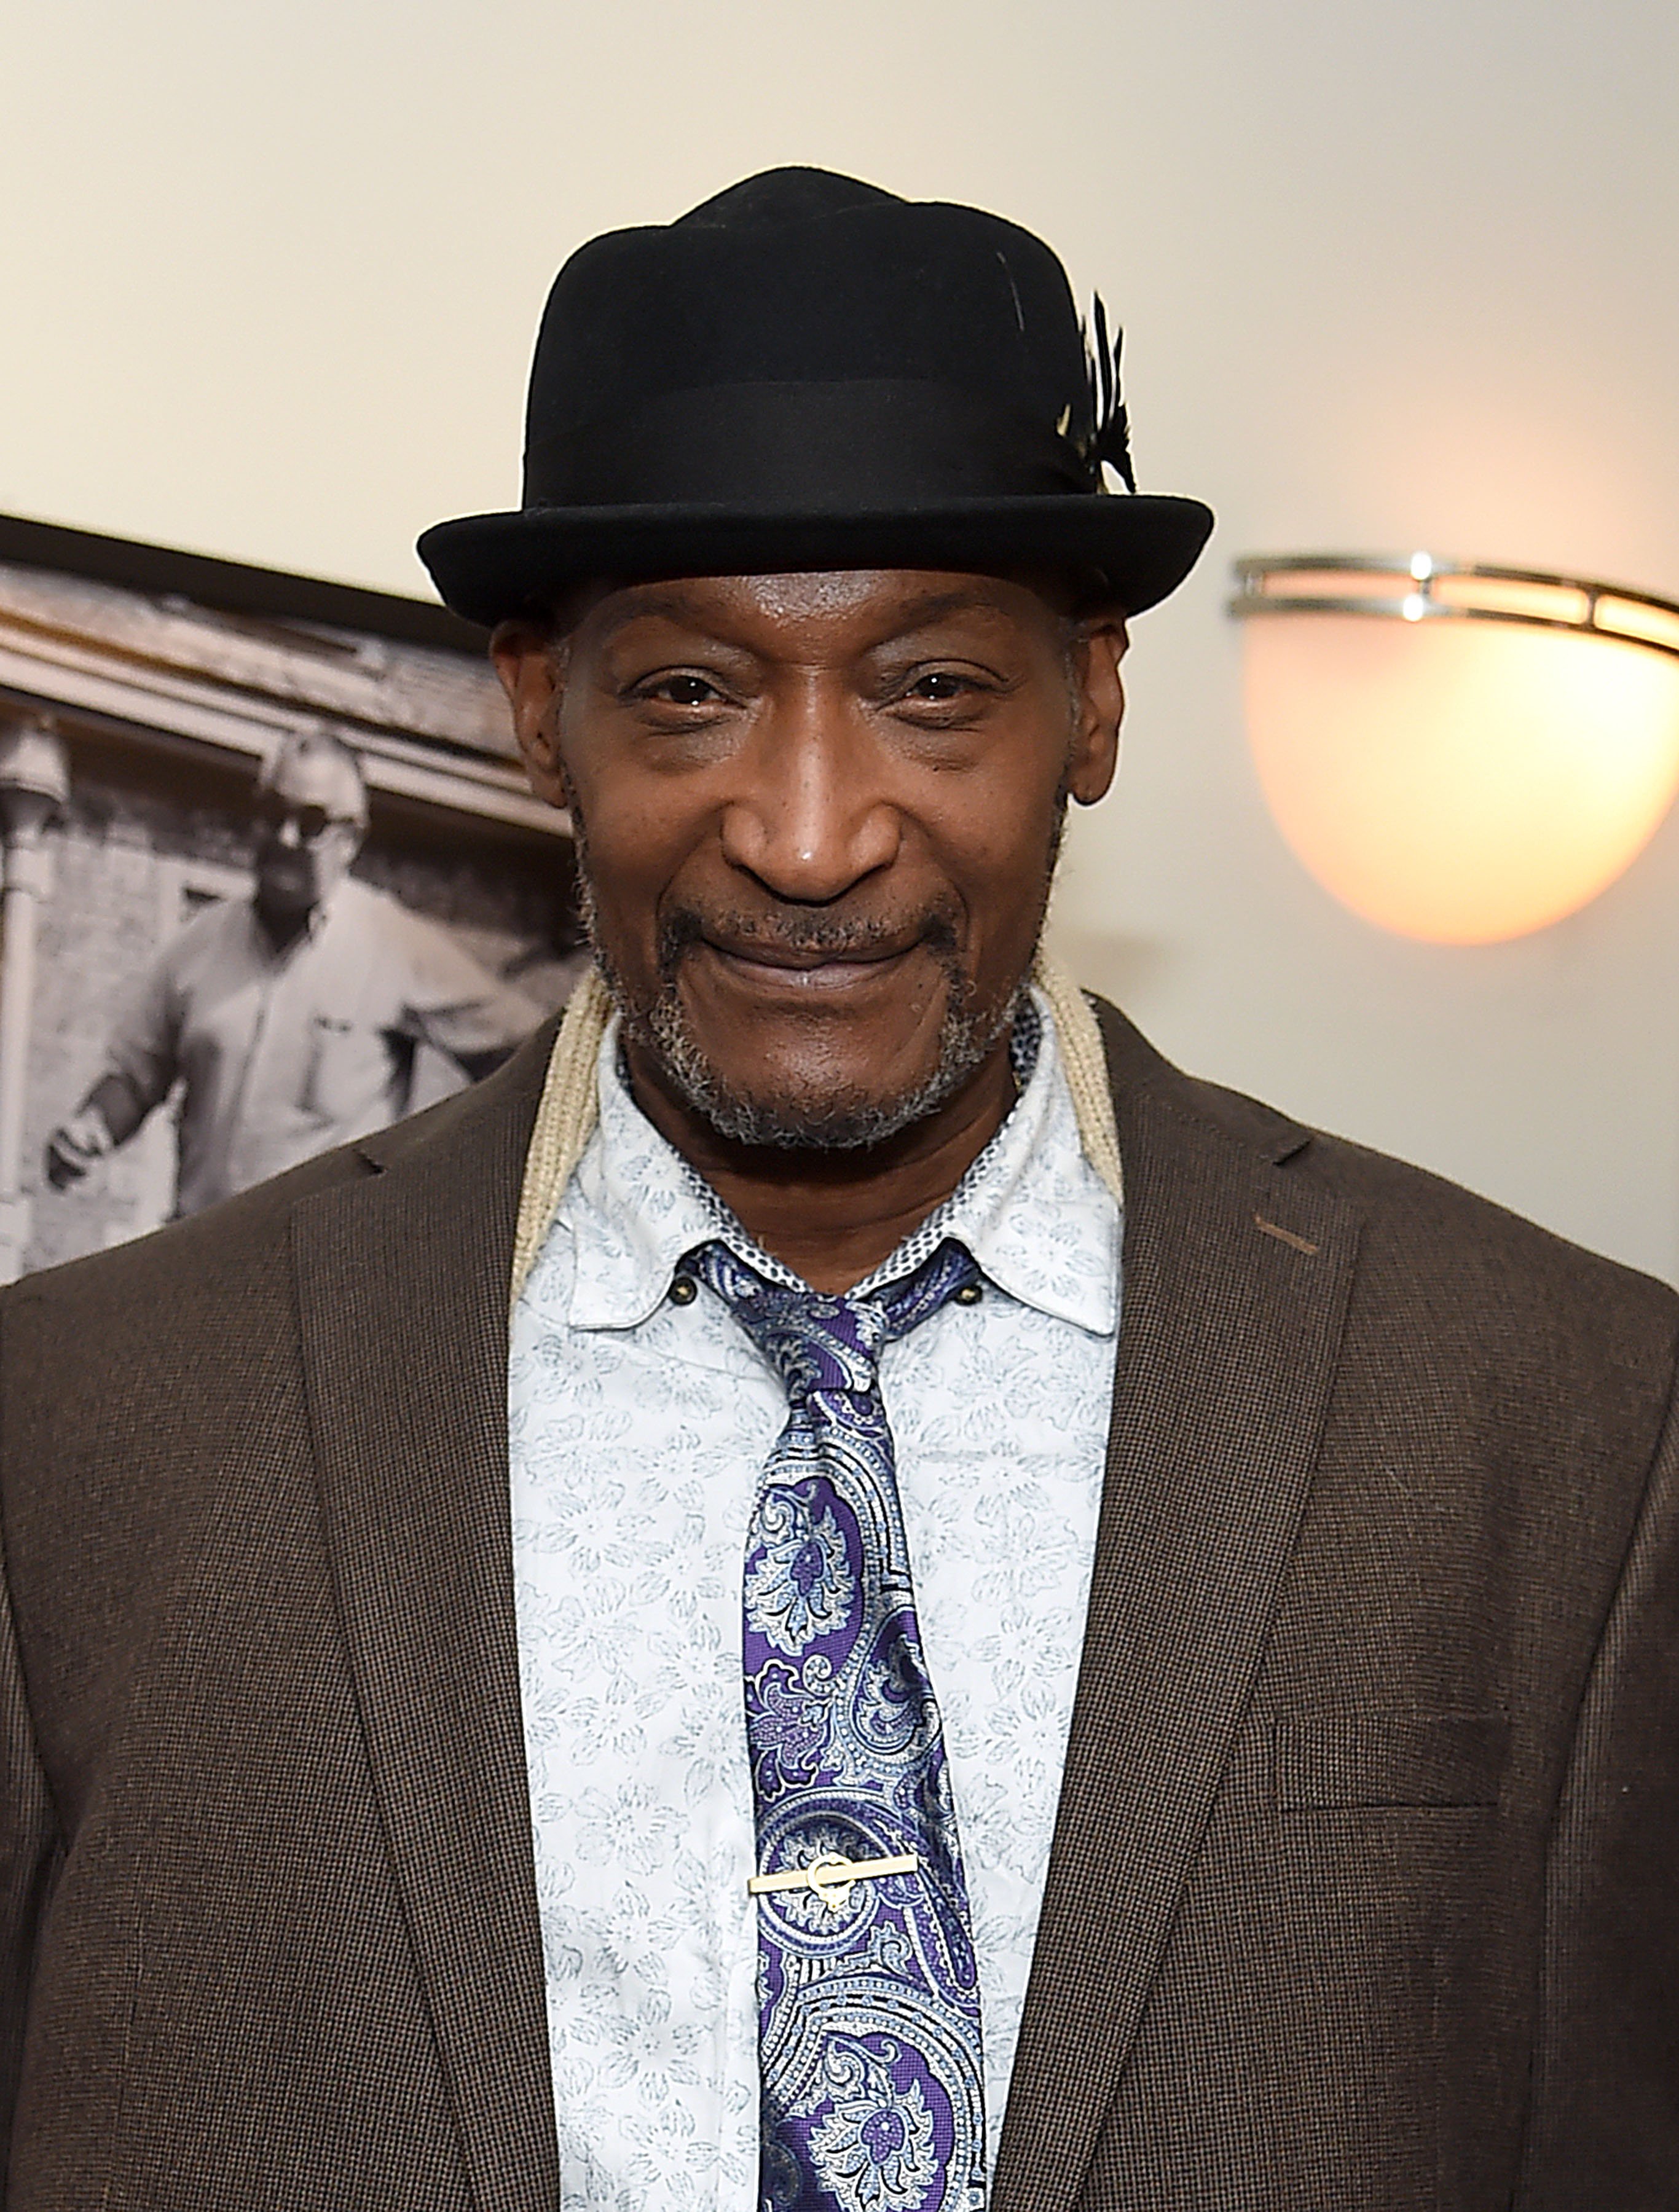 Tony Todd wearing a suit and a hat